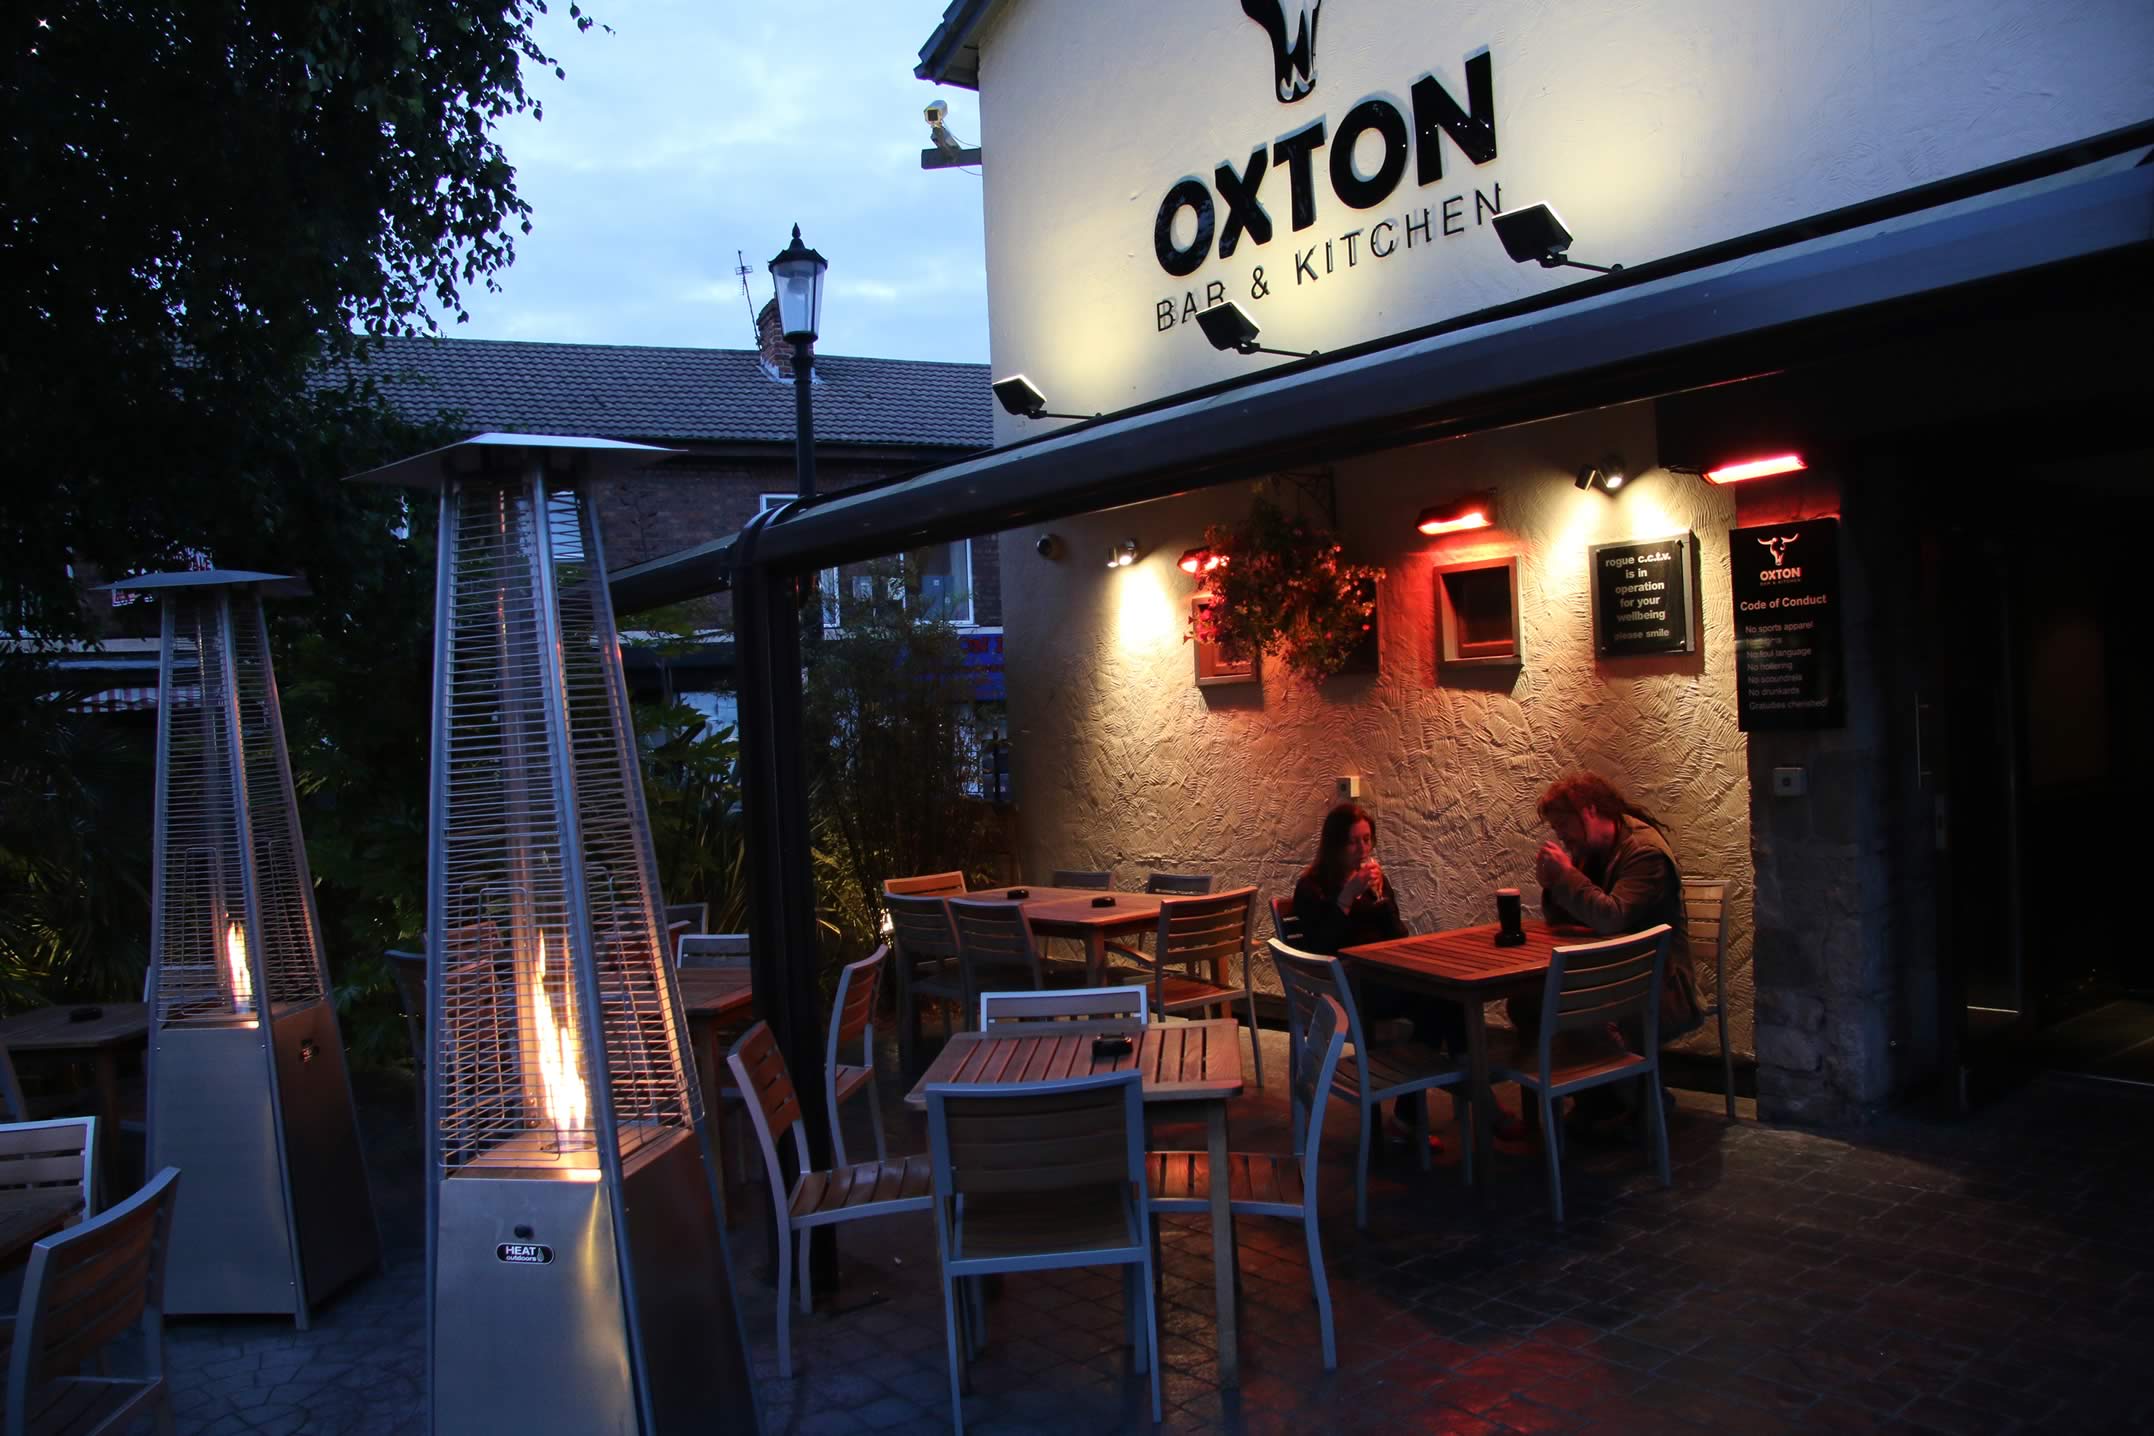 whats on tonight at oxton bar and kitchen